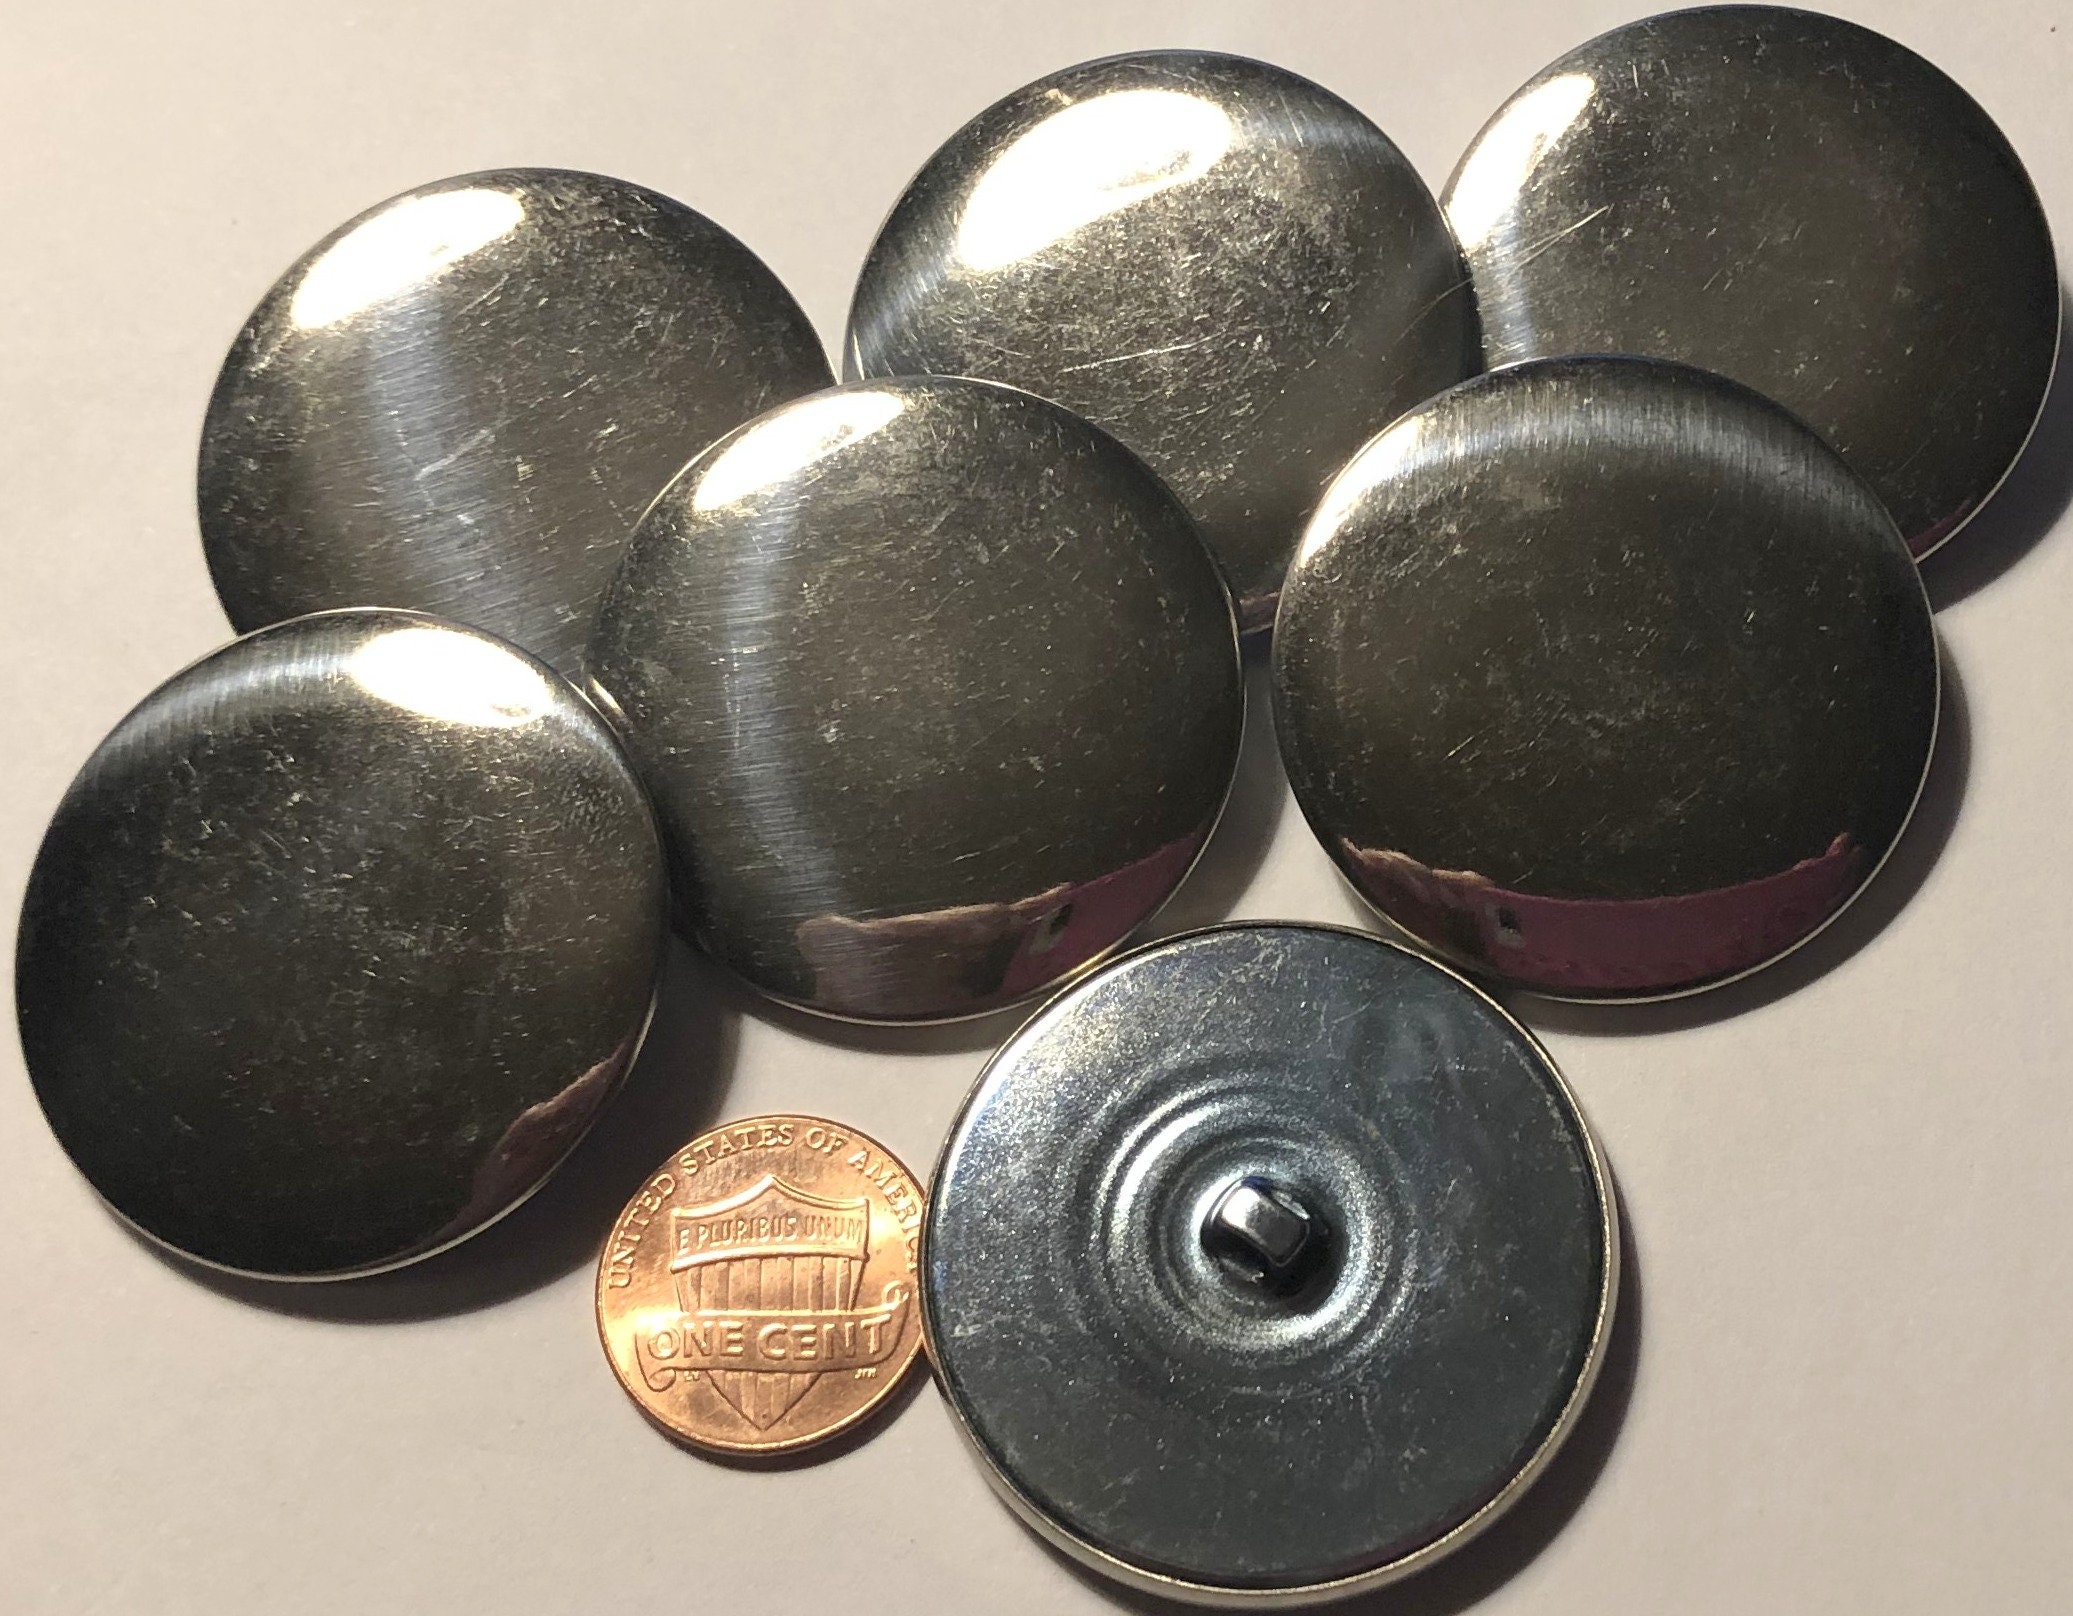 Silver finish metal buttons shank 15mm in diameter (1/2 inch) - silver  tone shank button (05p)